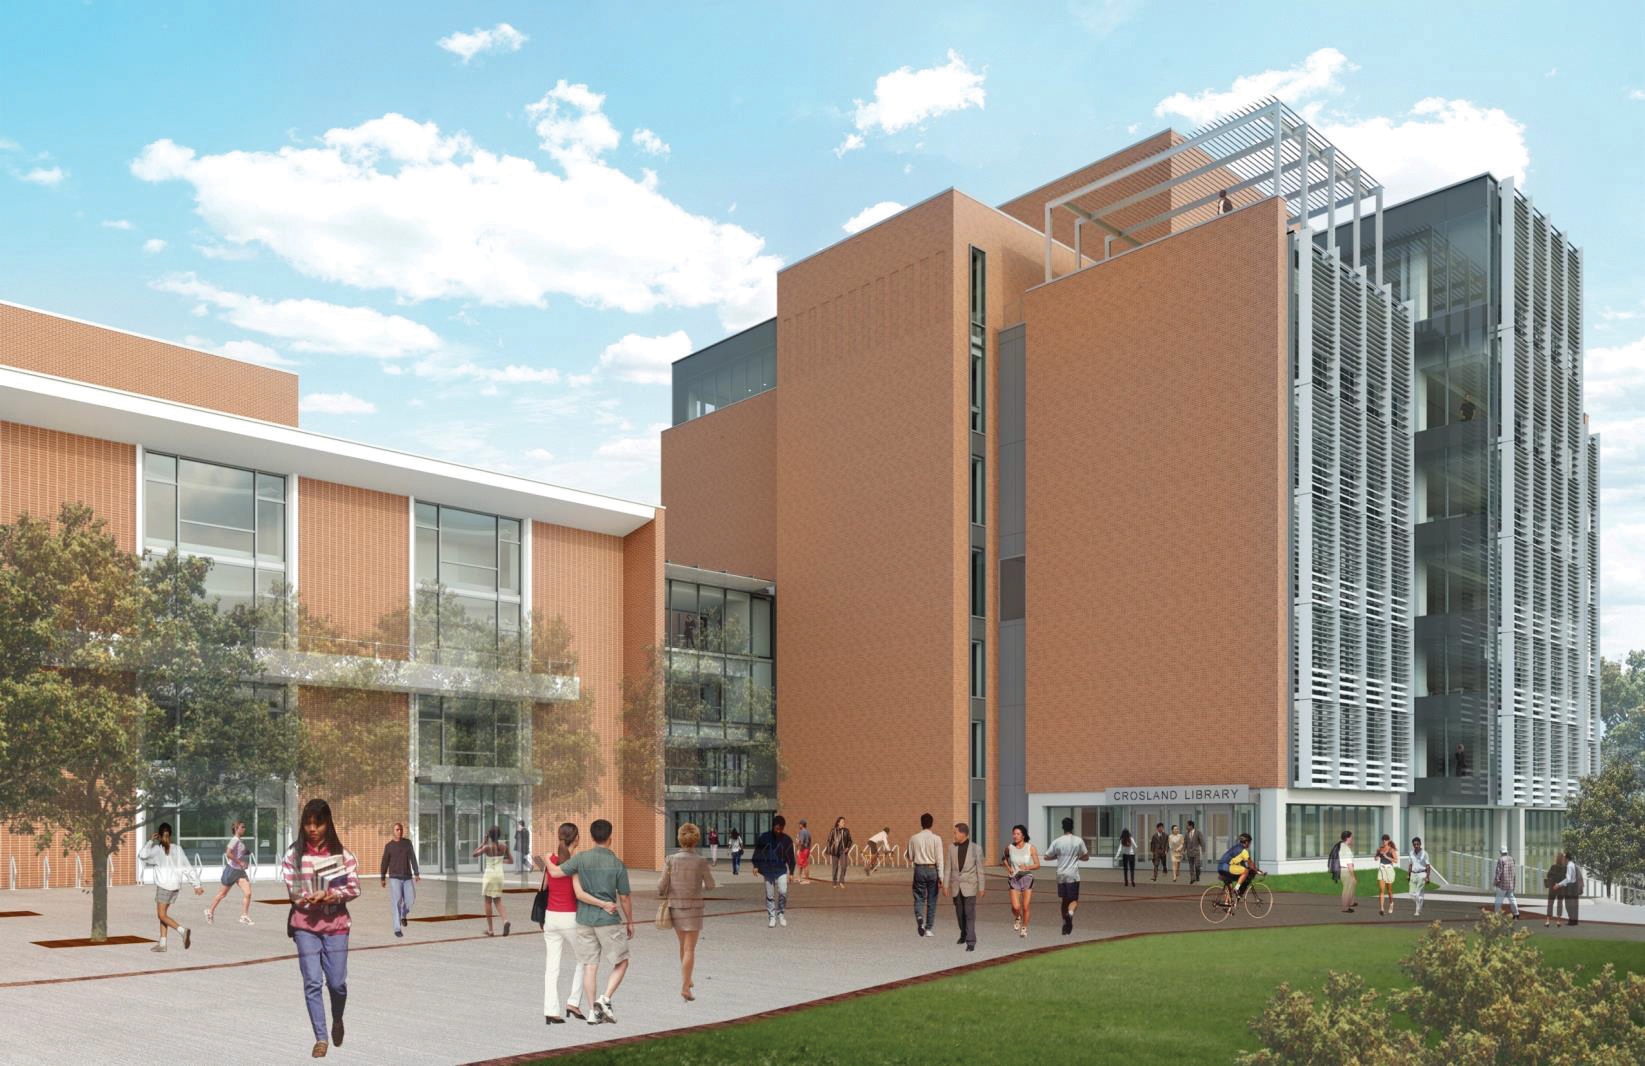 The existing main entrance will be redesigned, keeping an access point but moving the main entry to the north side of the complex near the Hinman Research Building.